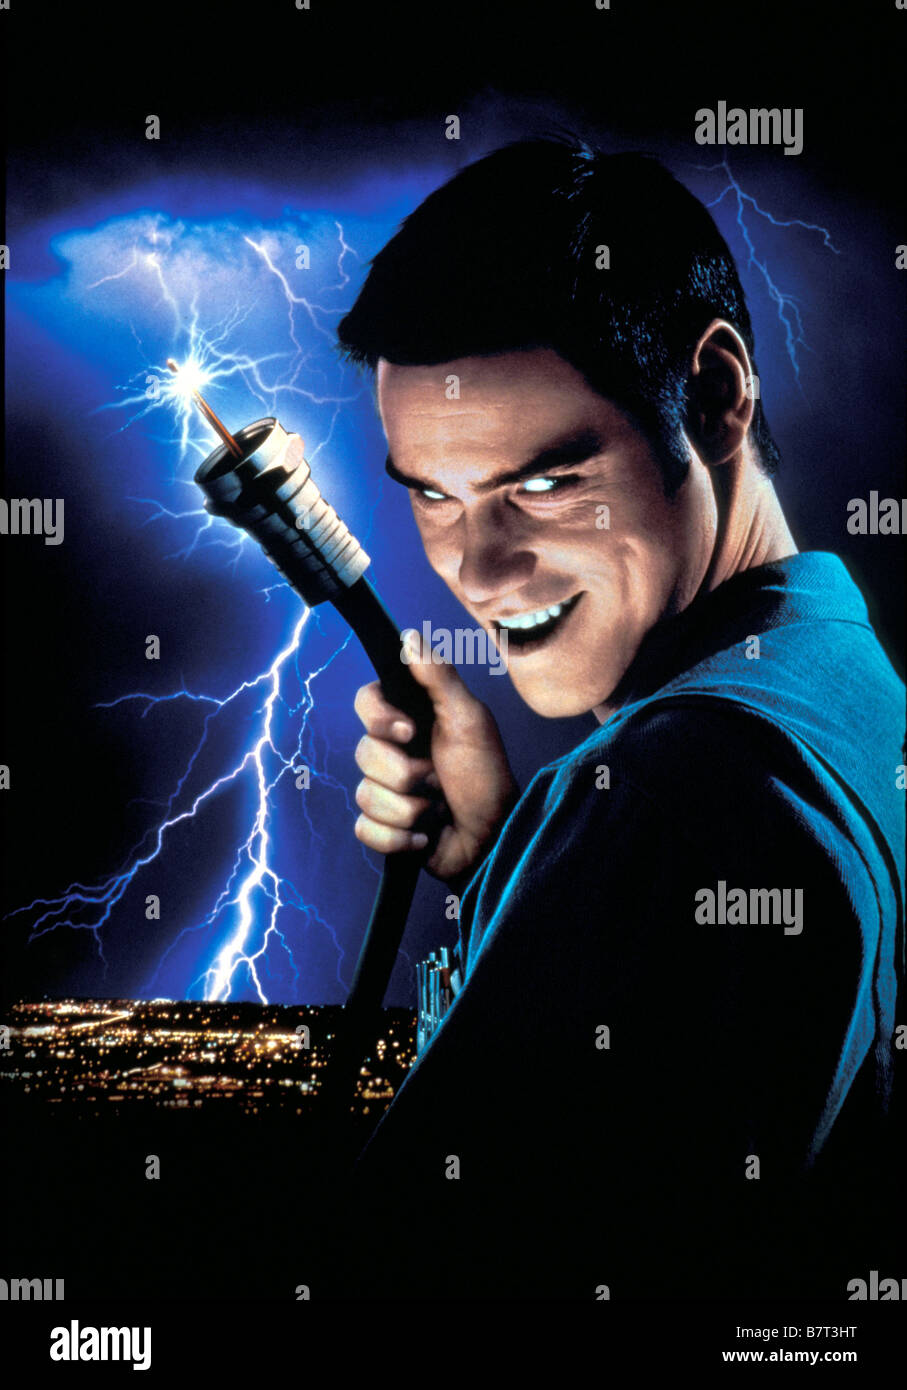 Jim Carrey in Ben Stiller's 'Cable Guy' on Blu-ray - The New York